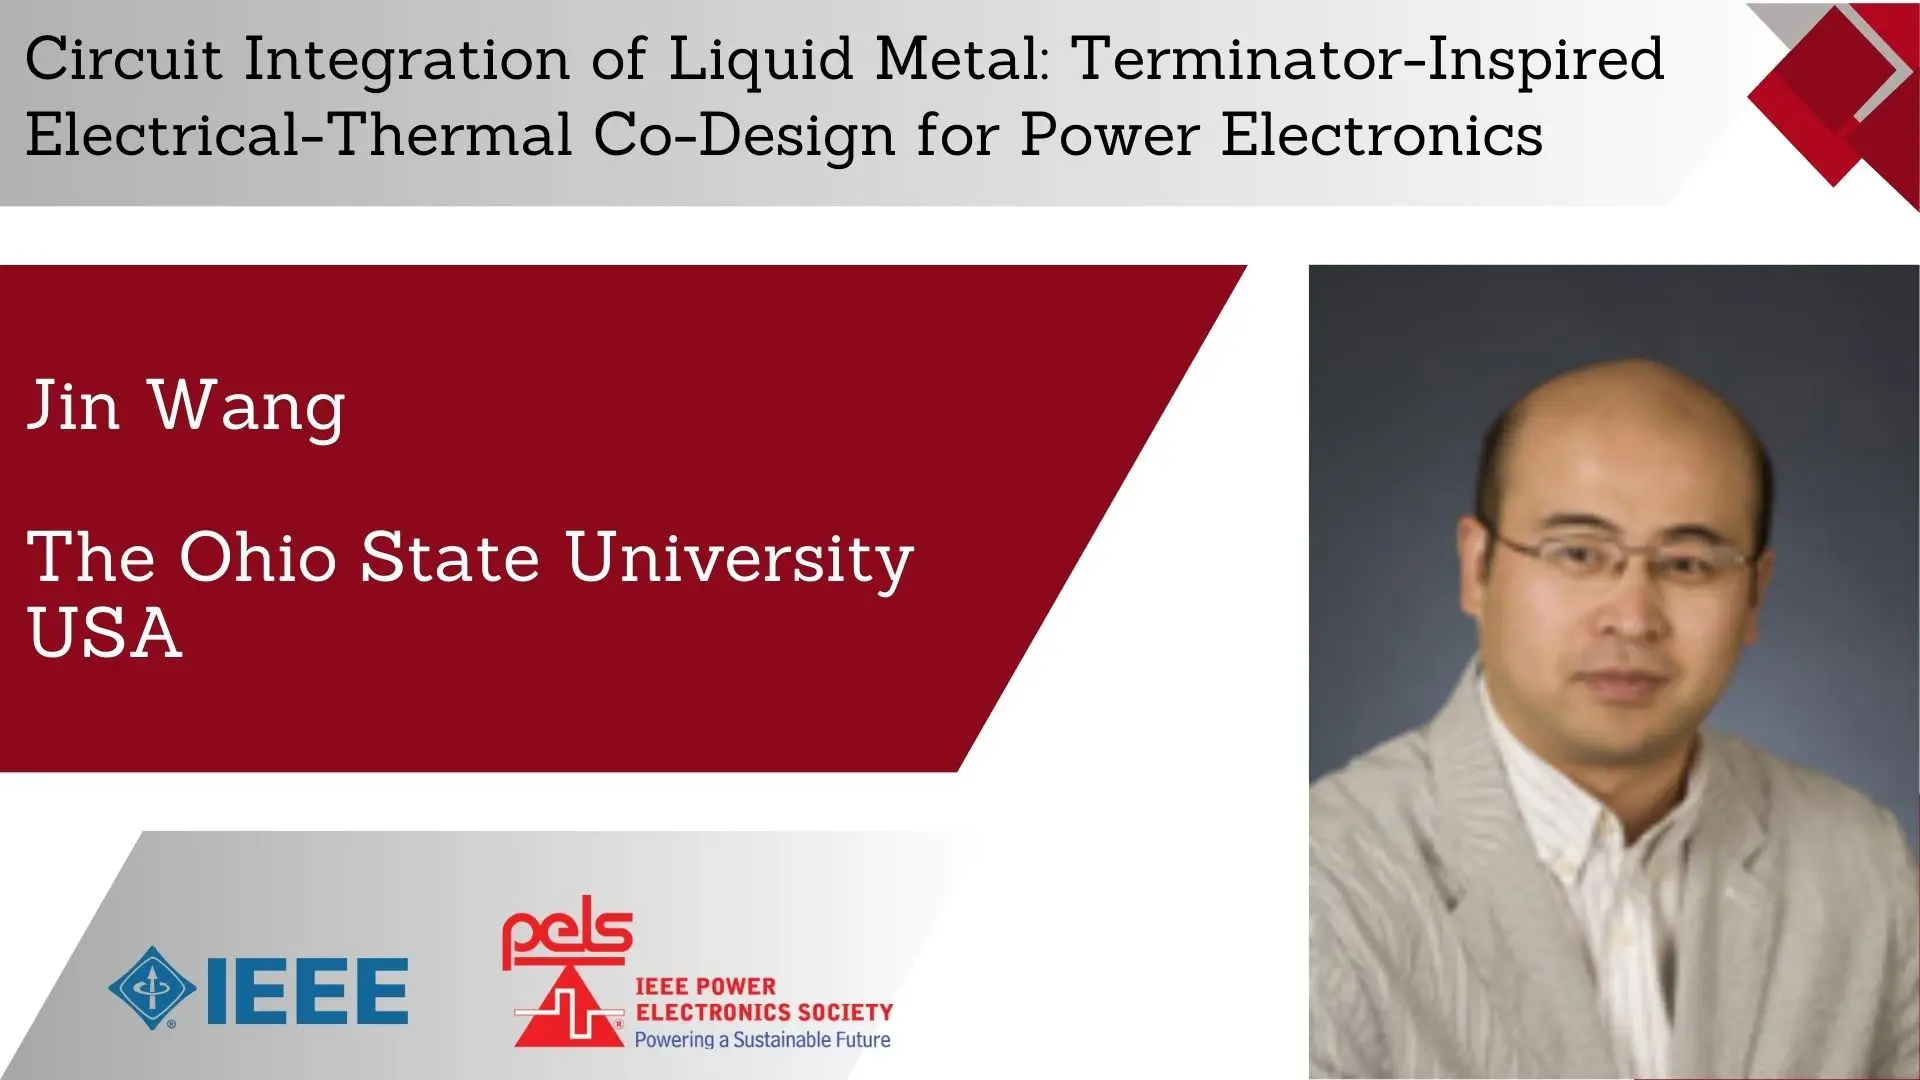 Circuit Integration of Liquid Metal: Terminator-Inspired Electrical-Thermal Co-Design for Power Electronics -Slides